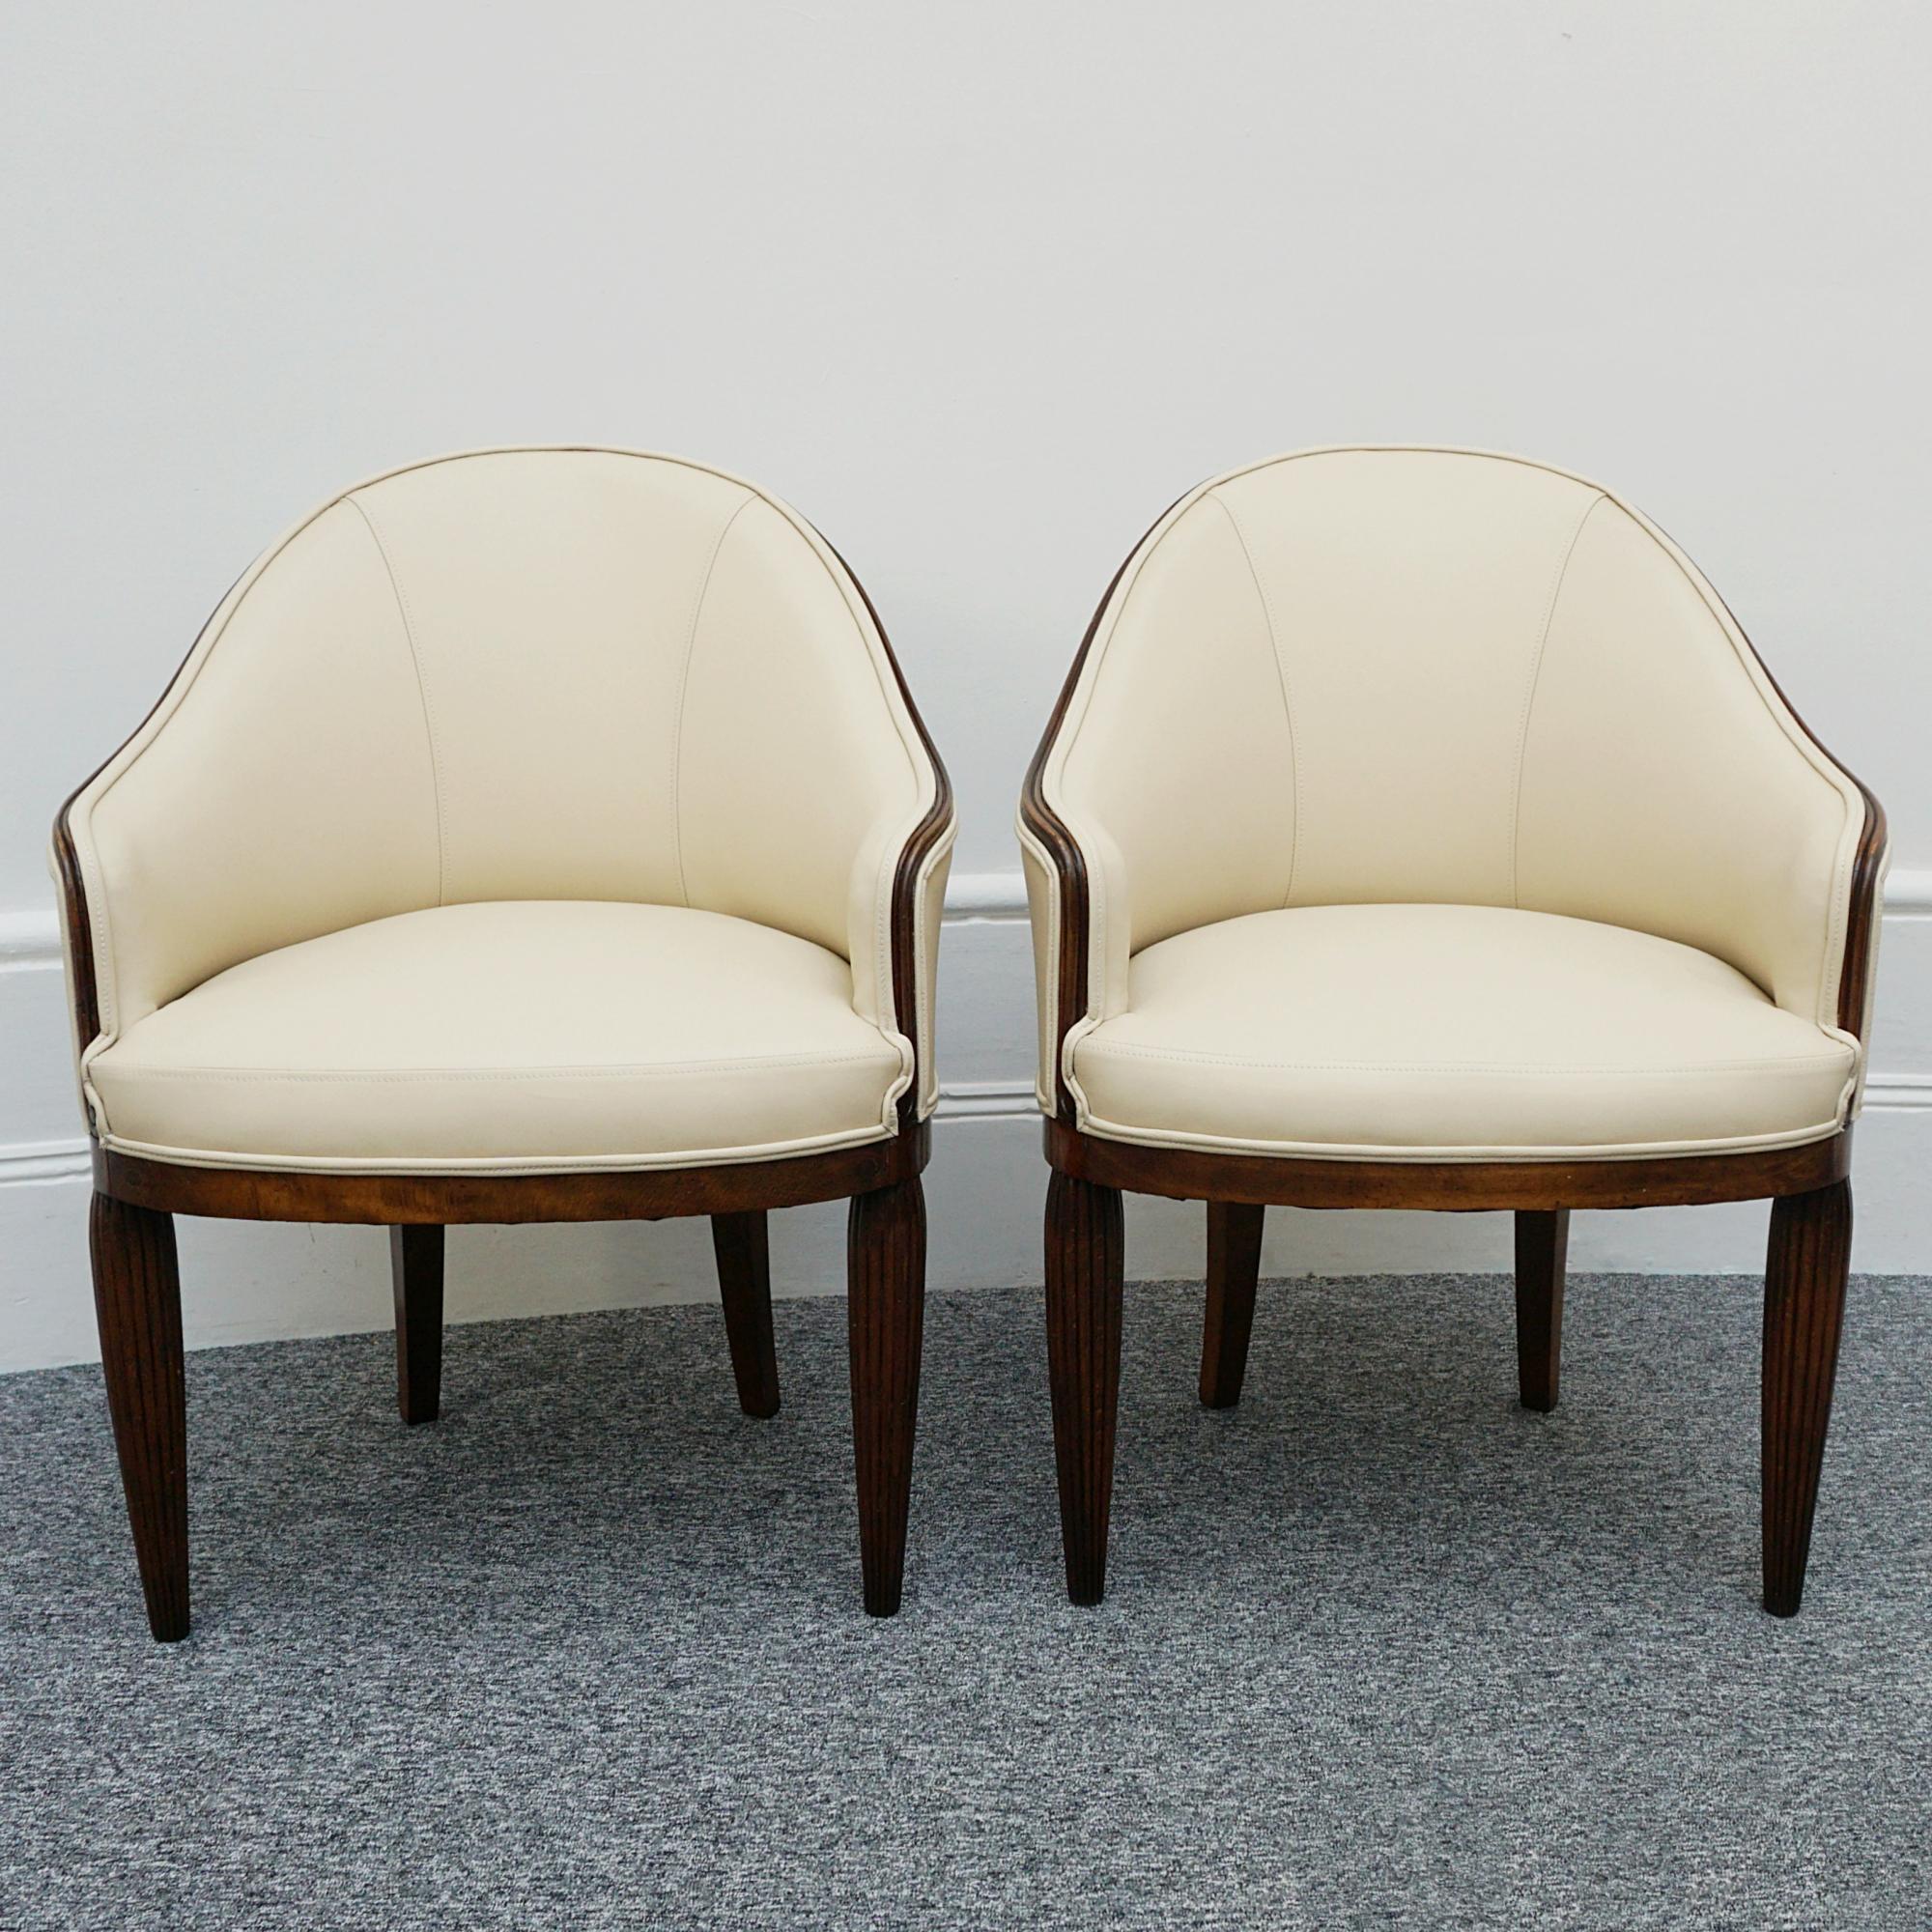 A pair of Art Deco tub chairs.  Re-upholstered in cream leather. 

All of our furniture is extensively polished and restored where necessary to the highest standards.

